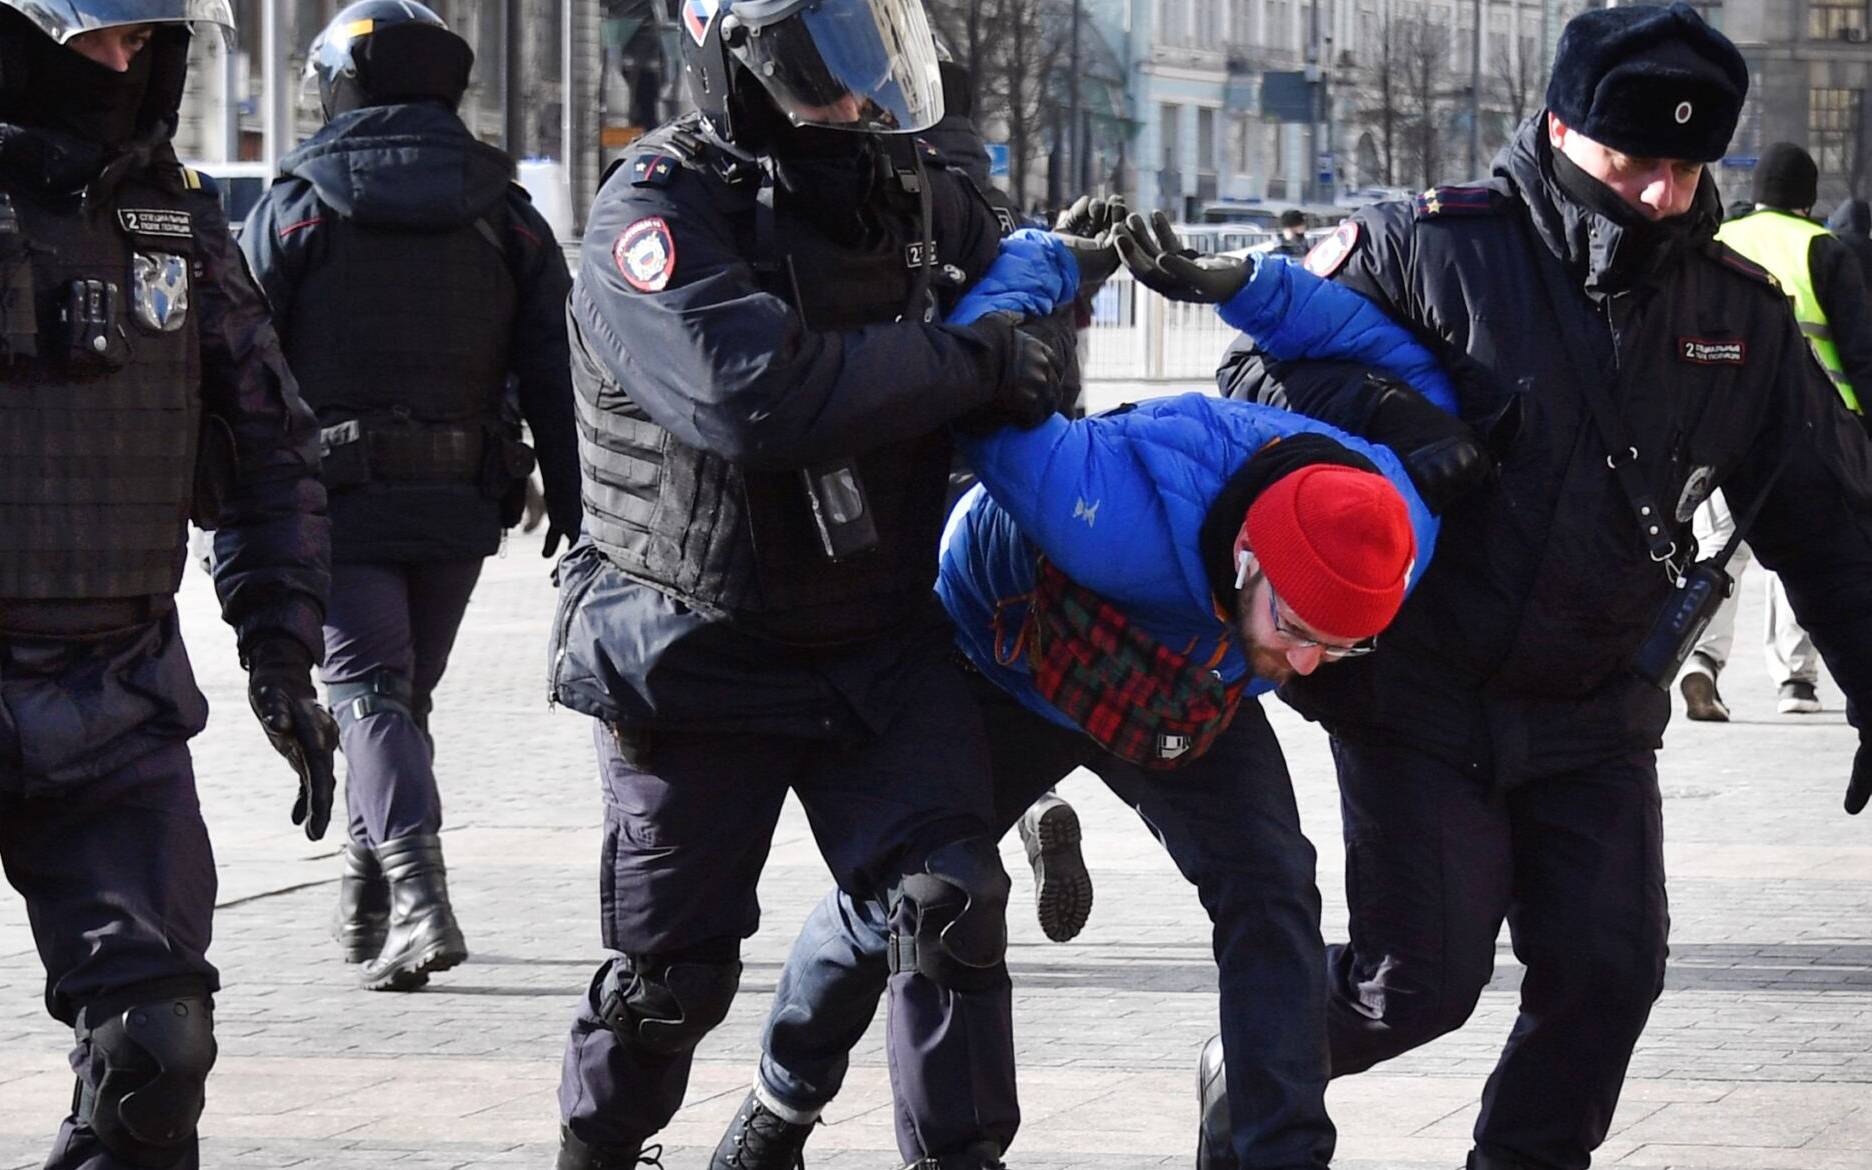 Police officers detain a man during a protest against Russia's invasion of Ukraine, in Manezhnaya square in central Moscow on March 13, 2022. (Photo by - / AFP)